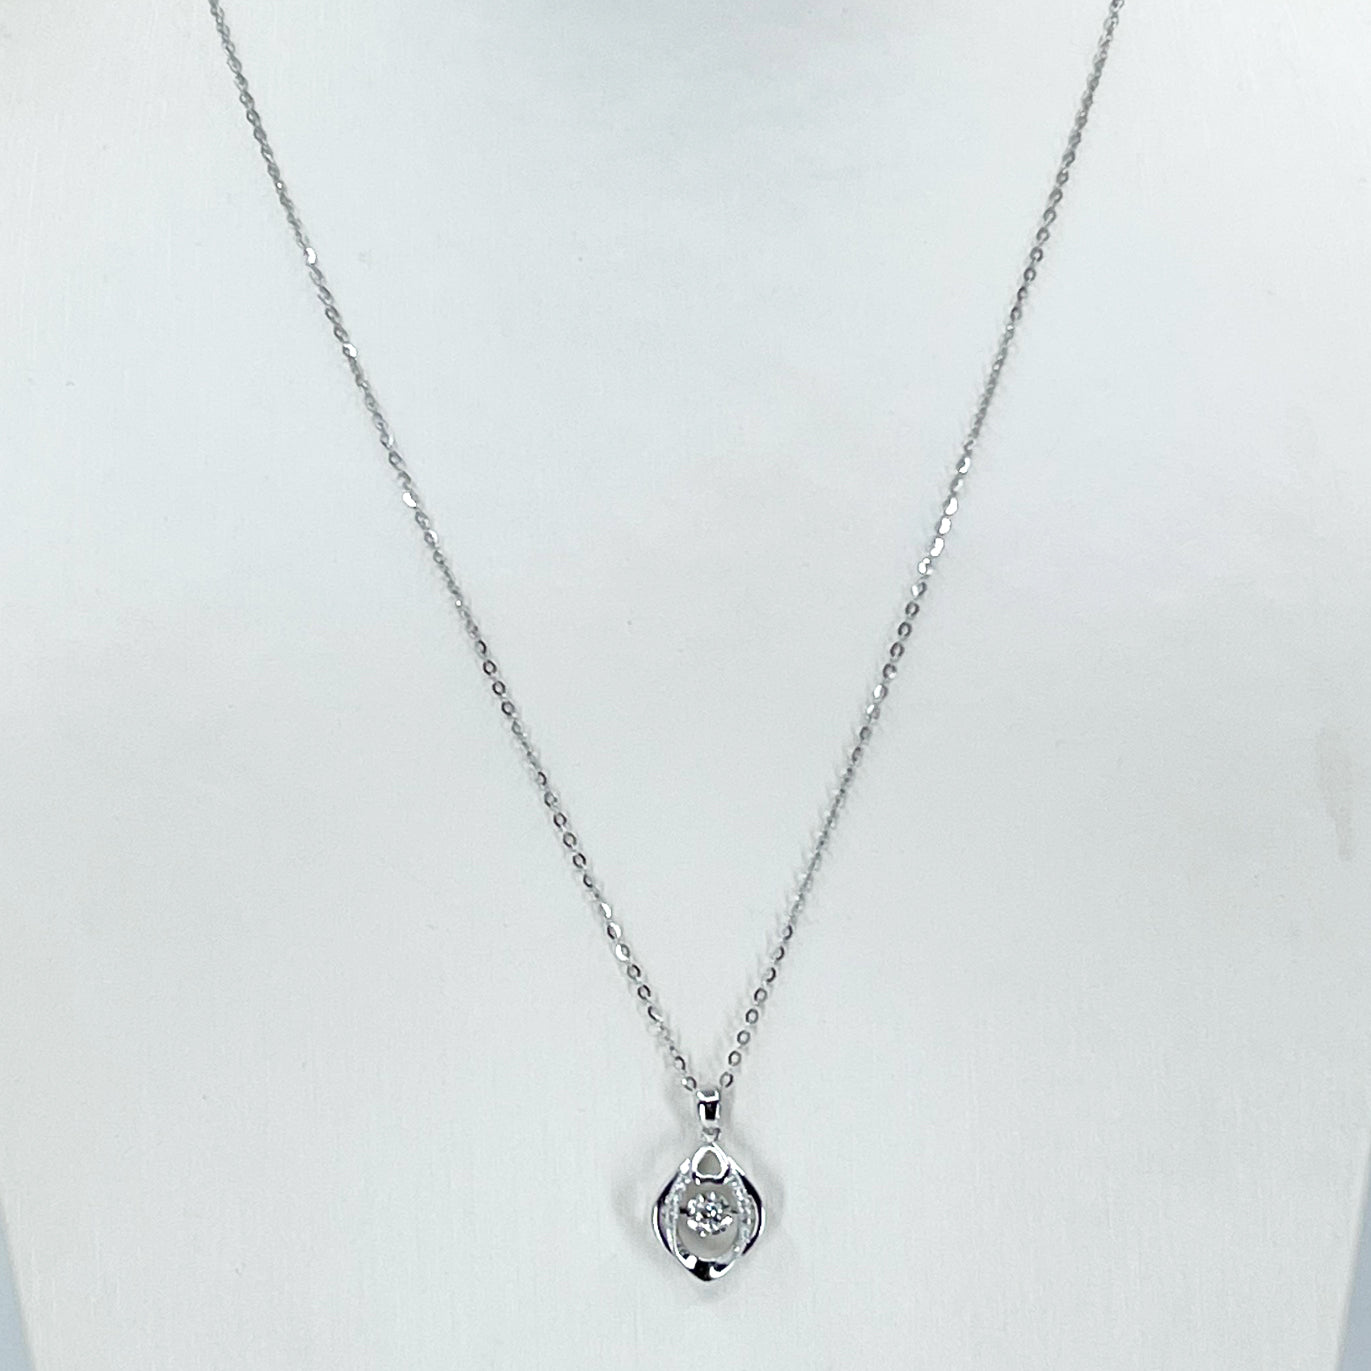 18K Solid White Gold Round Link Chain Necklace with Diamond Pendant 16